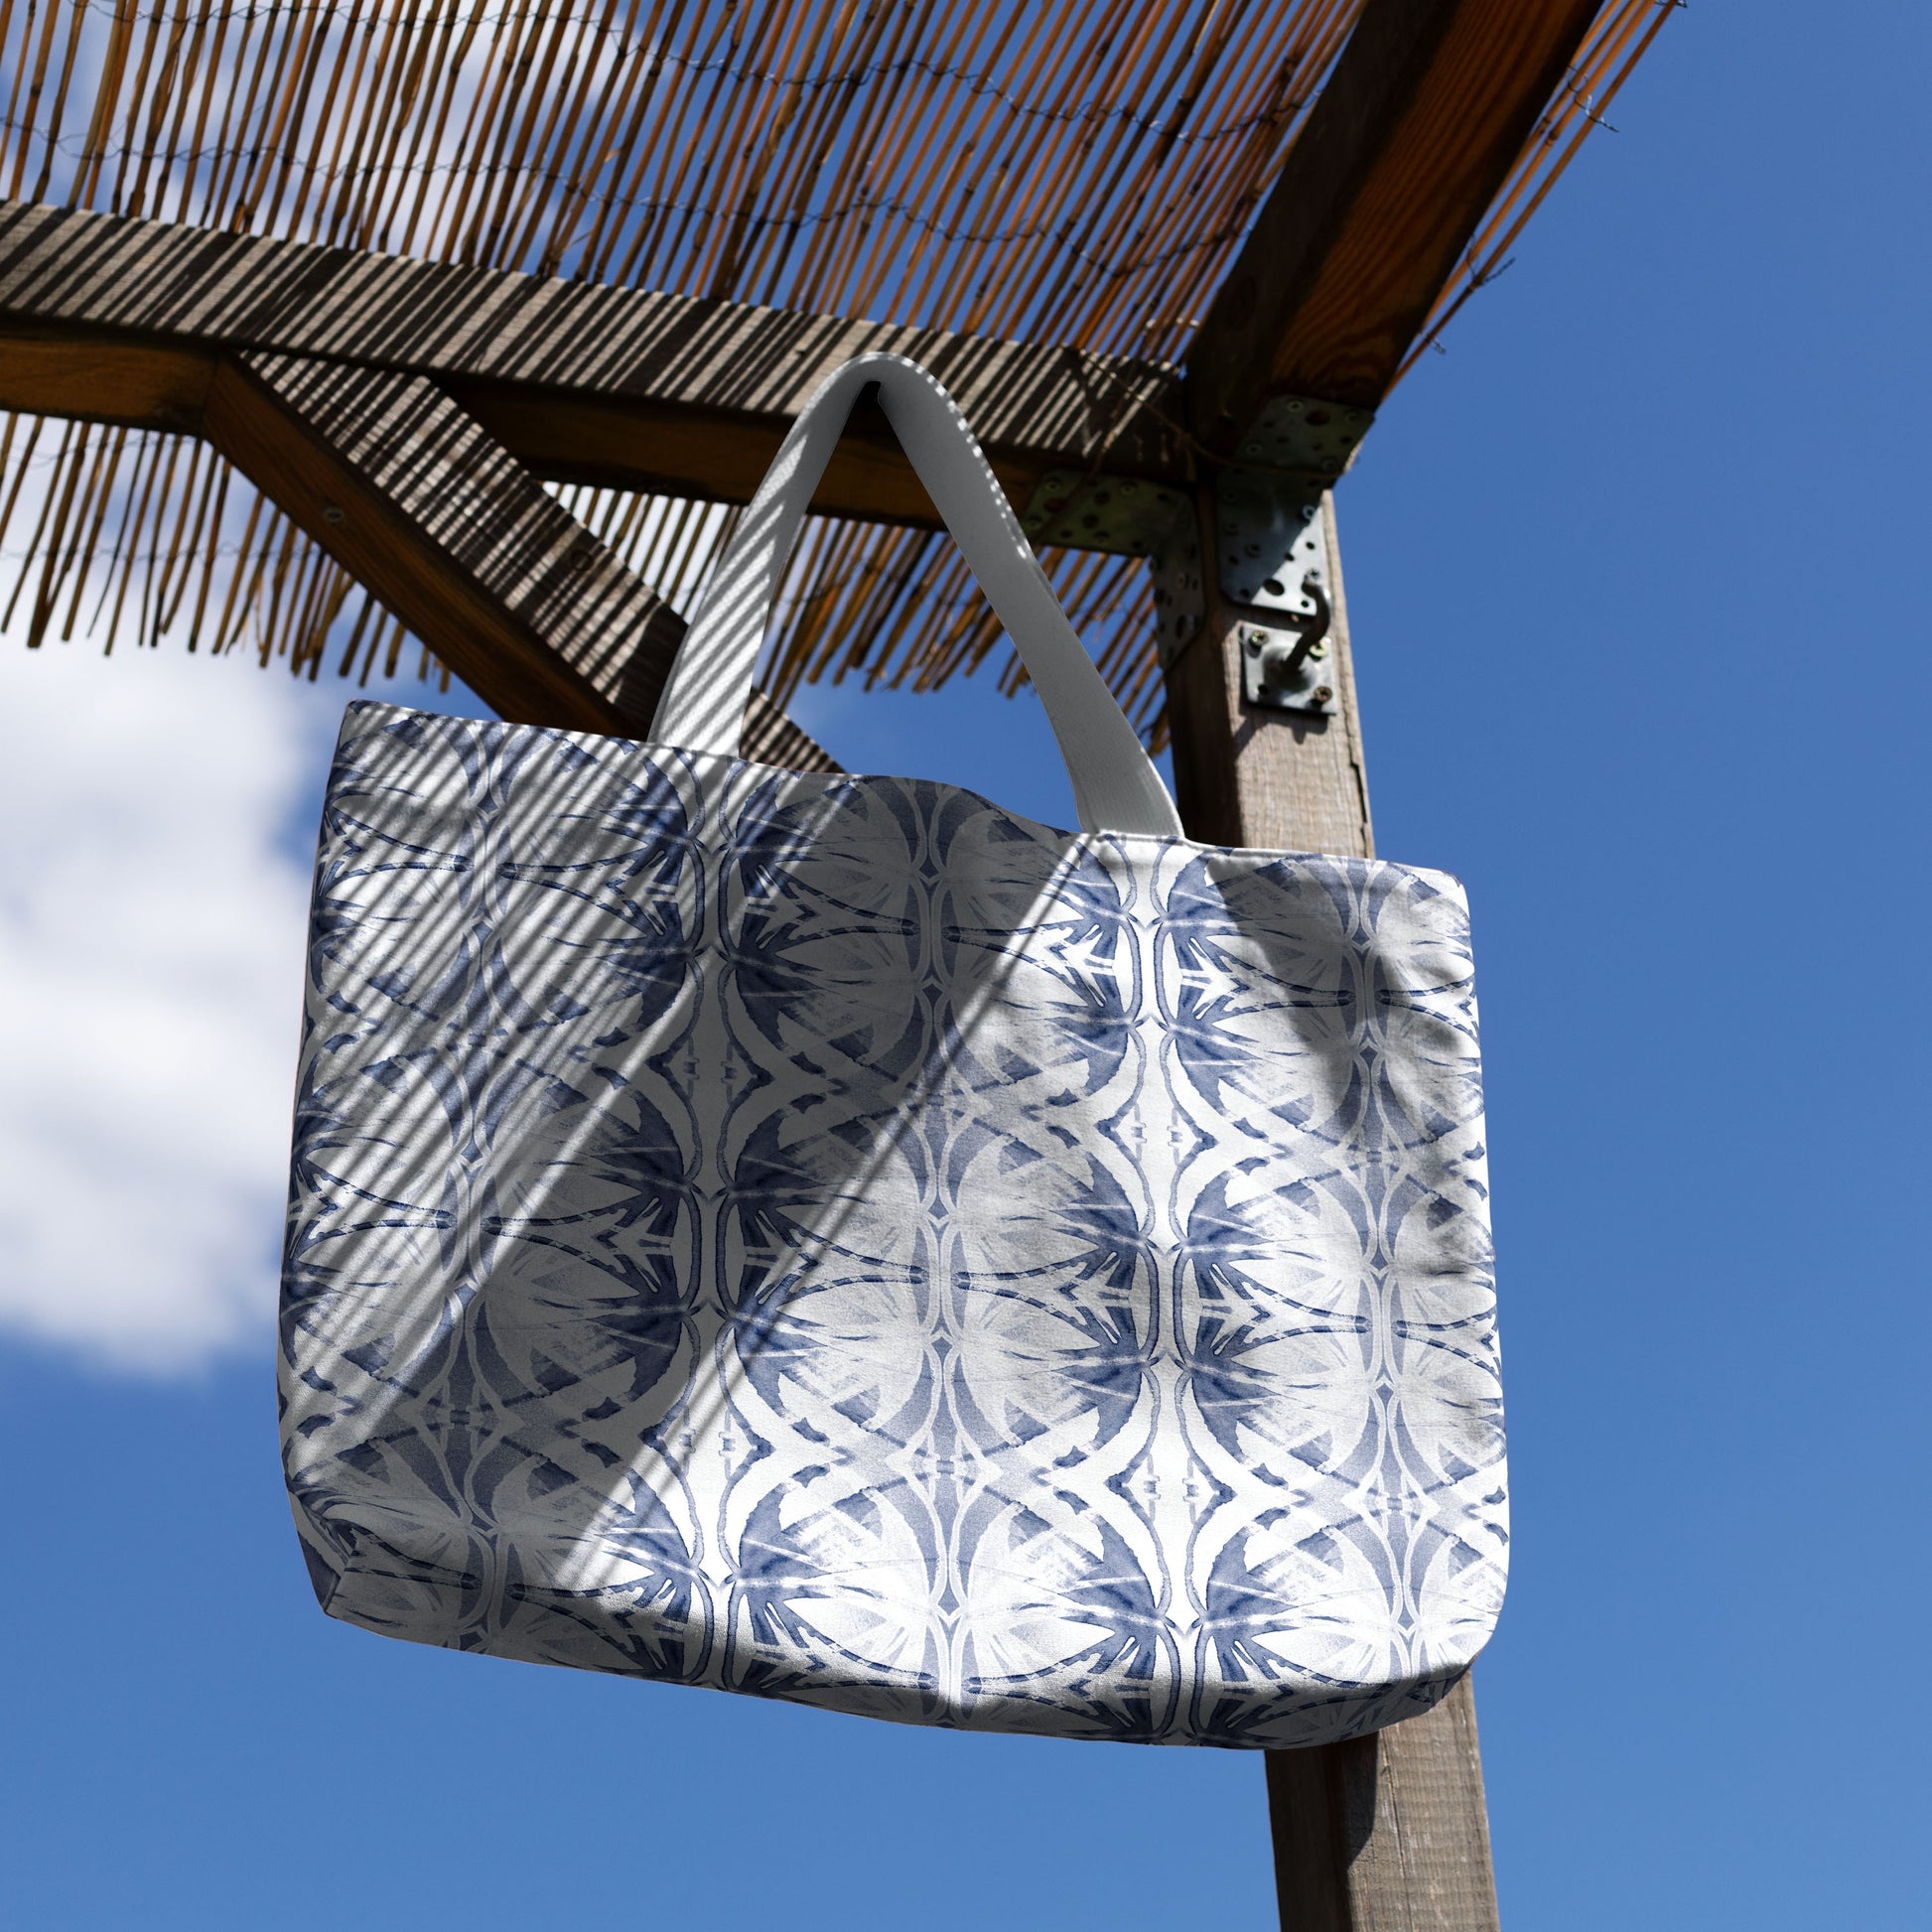 Blue and white pattern tote bag hanging from a thatched wood canopy